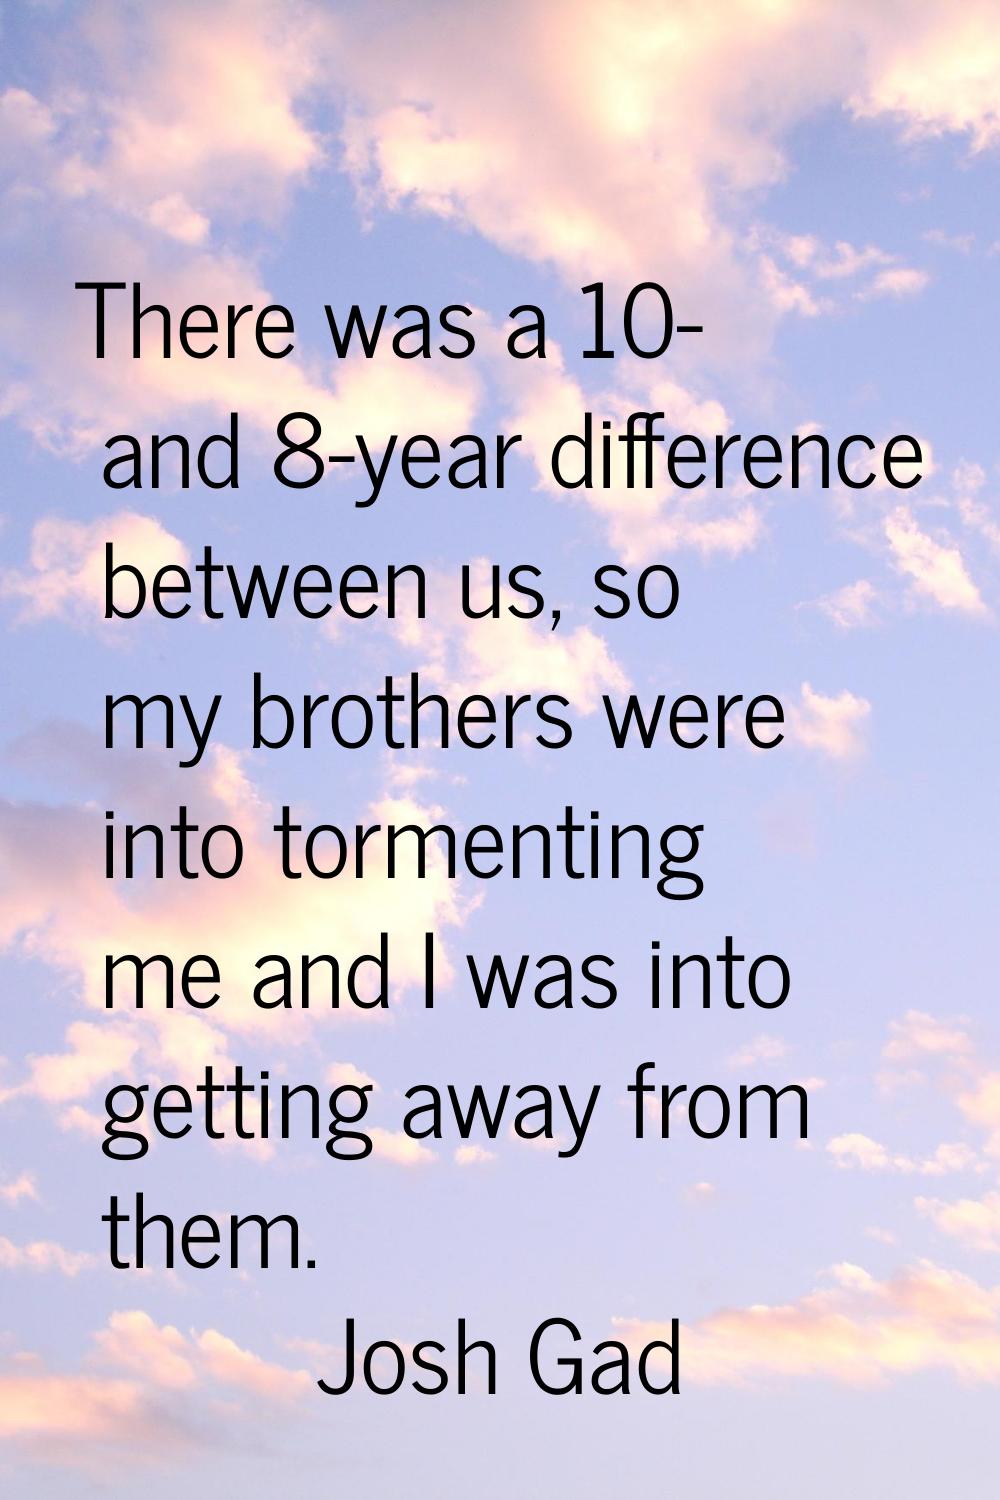 There was a 10- and 8-year difference between us, so my brothers were into tormenting me and I was 